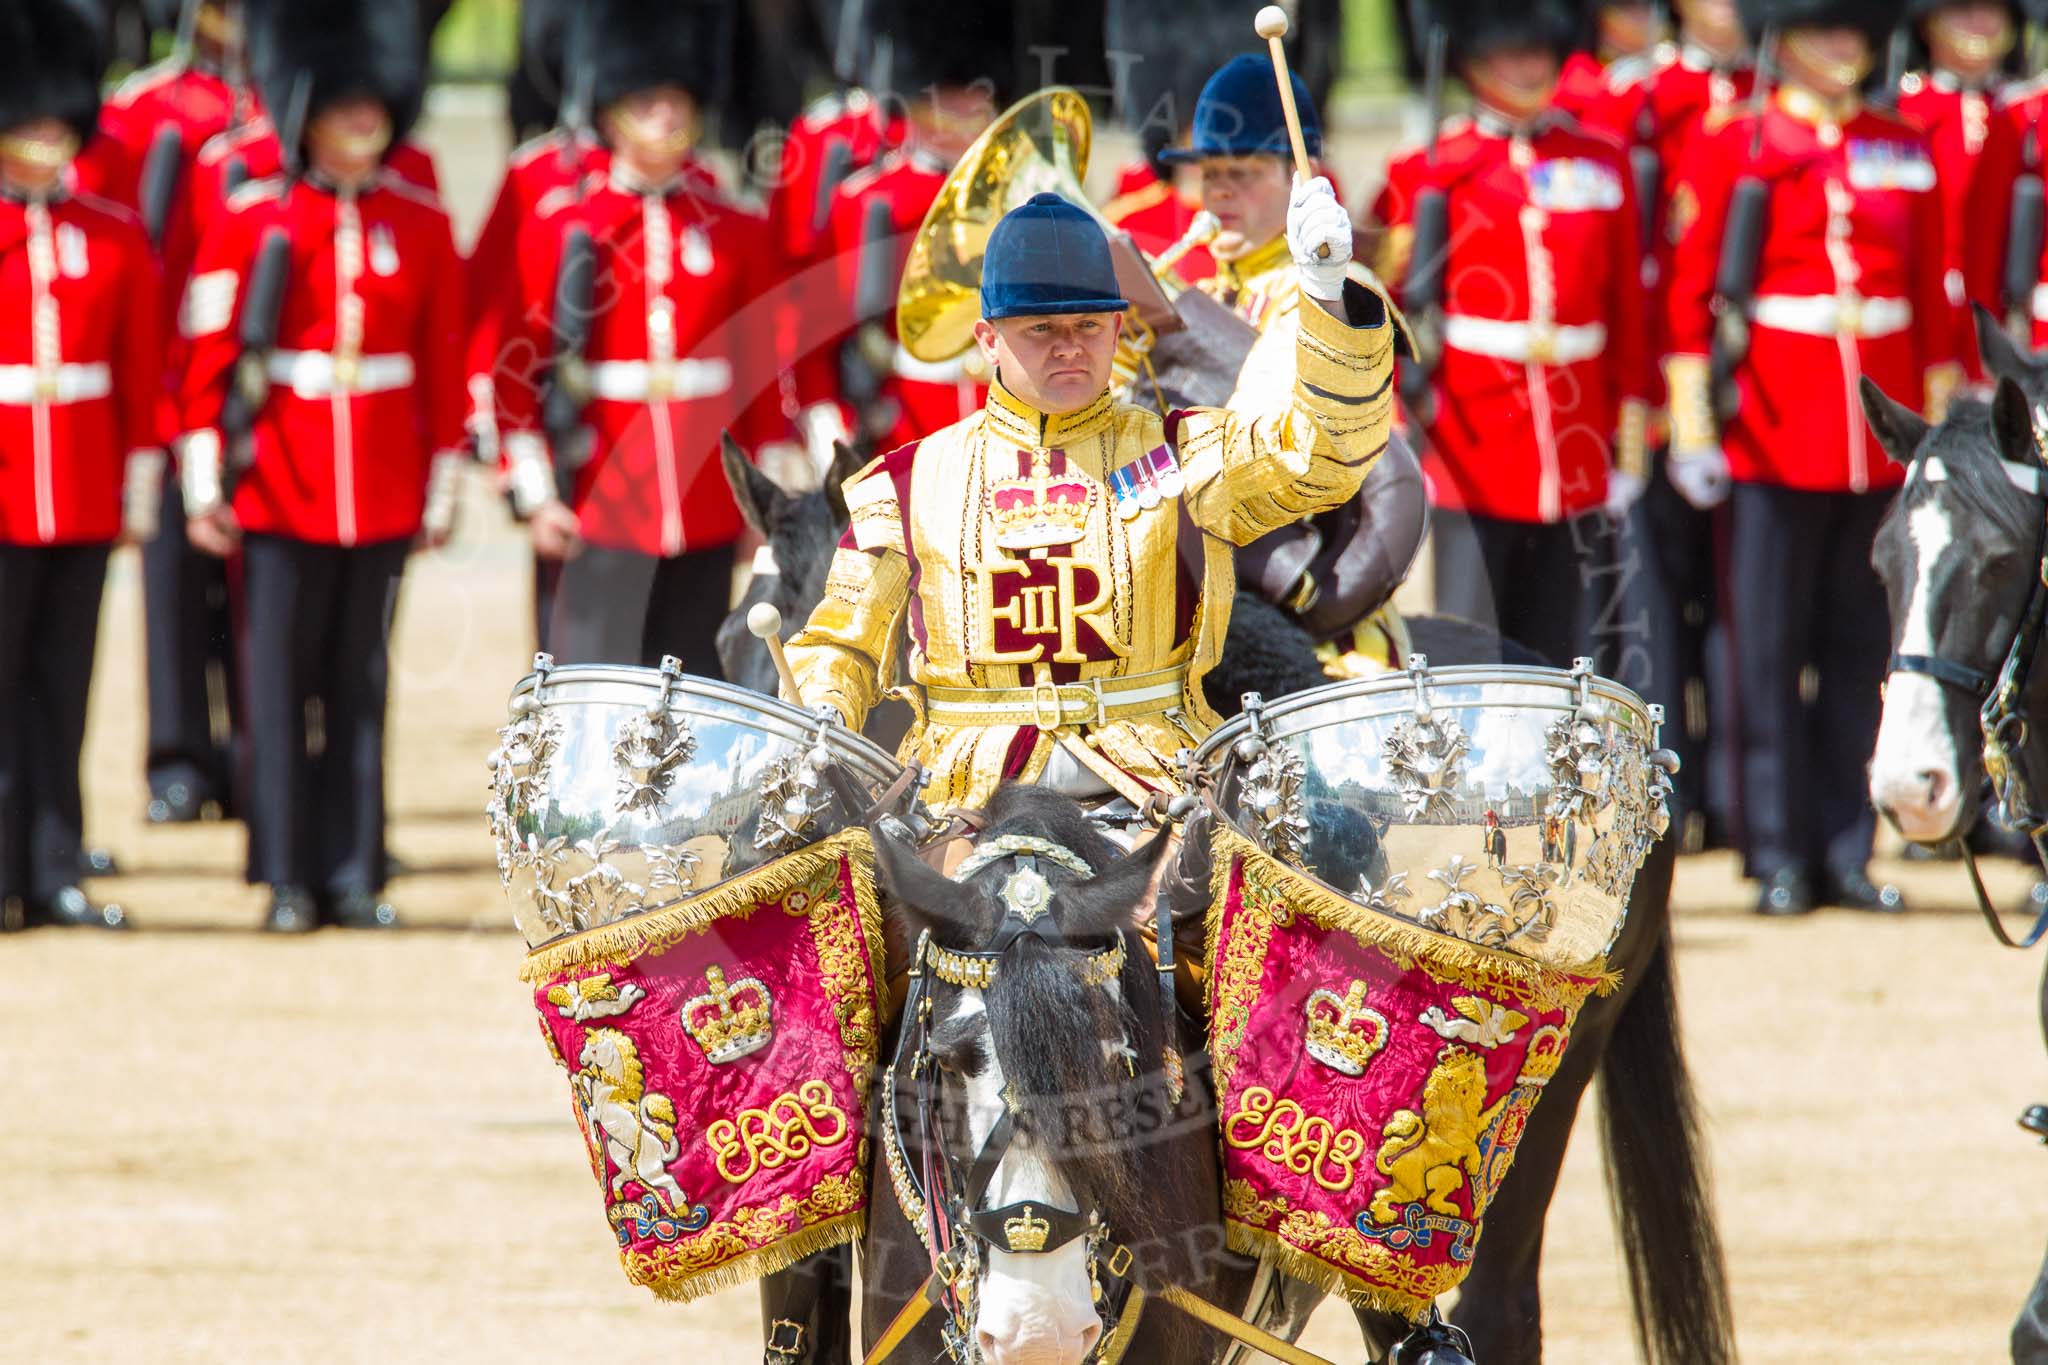 Trooping the Colour 2013: The Ride Past - the Mounted Bands of the Household Cavalry move, from the eastern side, onto Horse Guards Parade. Here the kettle drummer from The Life Guards. Image #655, 15 June 2013 11:53 Horse Guards Parade, London, UK